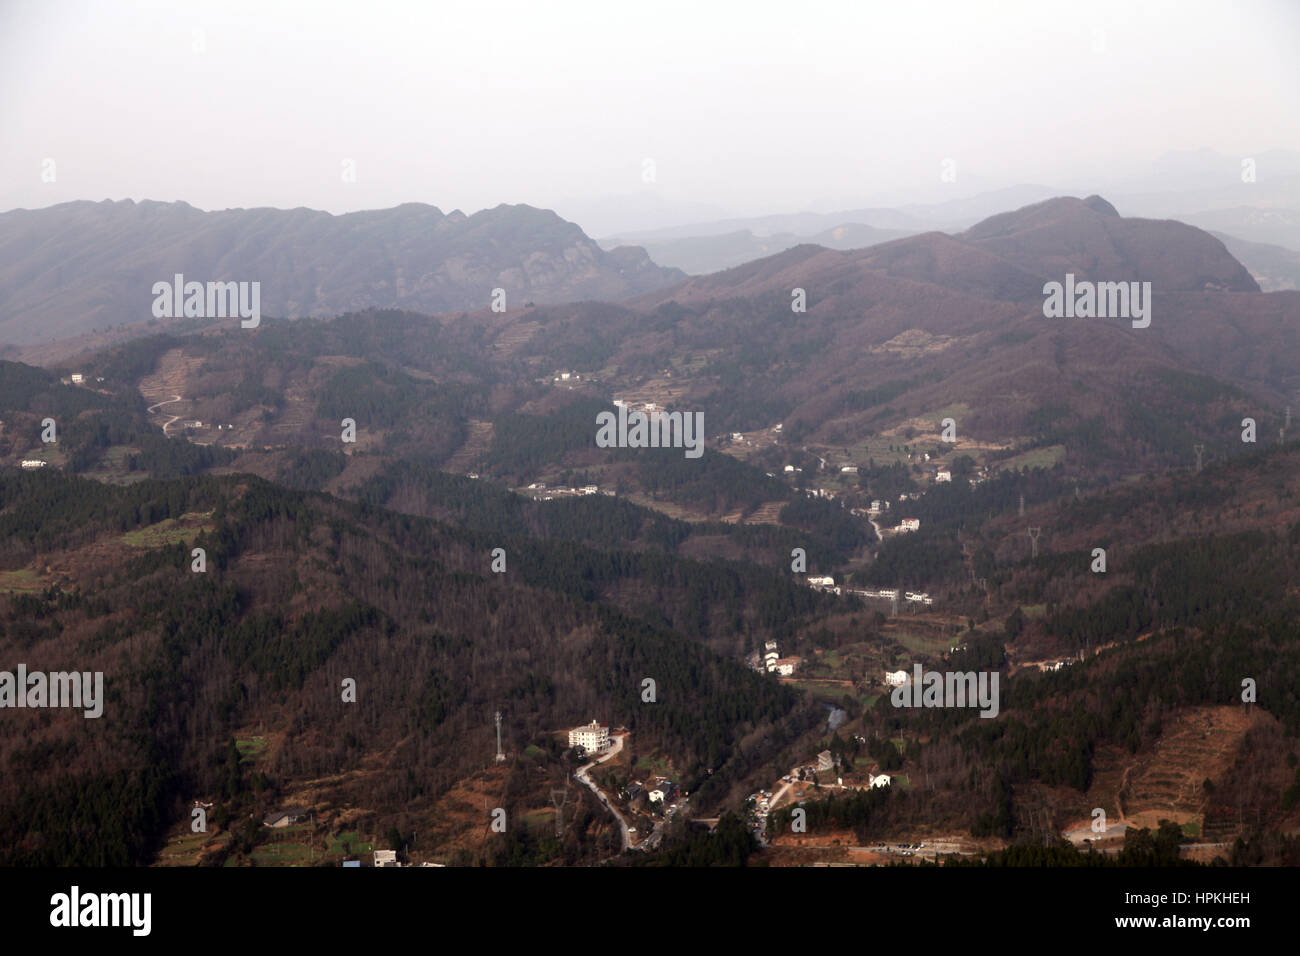 Guangyuan, Guangyuan, China. 23rd Feb, 2017. Guangyuan, CHINA-February 23 2017: (EDITORIAL USE ONLY. CHINA OUT) .The Jianmen Pass is a mountain pass located southwest of the city of Guangyuan in southwest China's Sichuan Province. The natural pass is formed by cliffs on the sides of mountains.Jianmen Pass is called the No.1 Impregnable Pass in the world for its magnificence and danger, praised as the National Forest Park for its quietness and beauty and honored as National Natural and Cultural Heritage for its historic site. Jianmen Pass is also listed in 5A Level Scenic Spots. Visitors Stock Photo